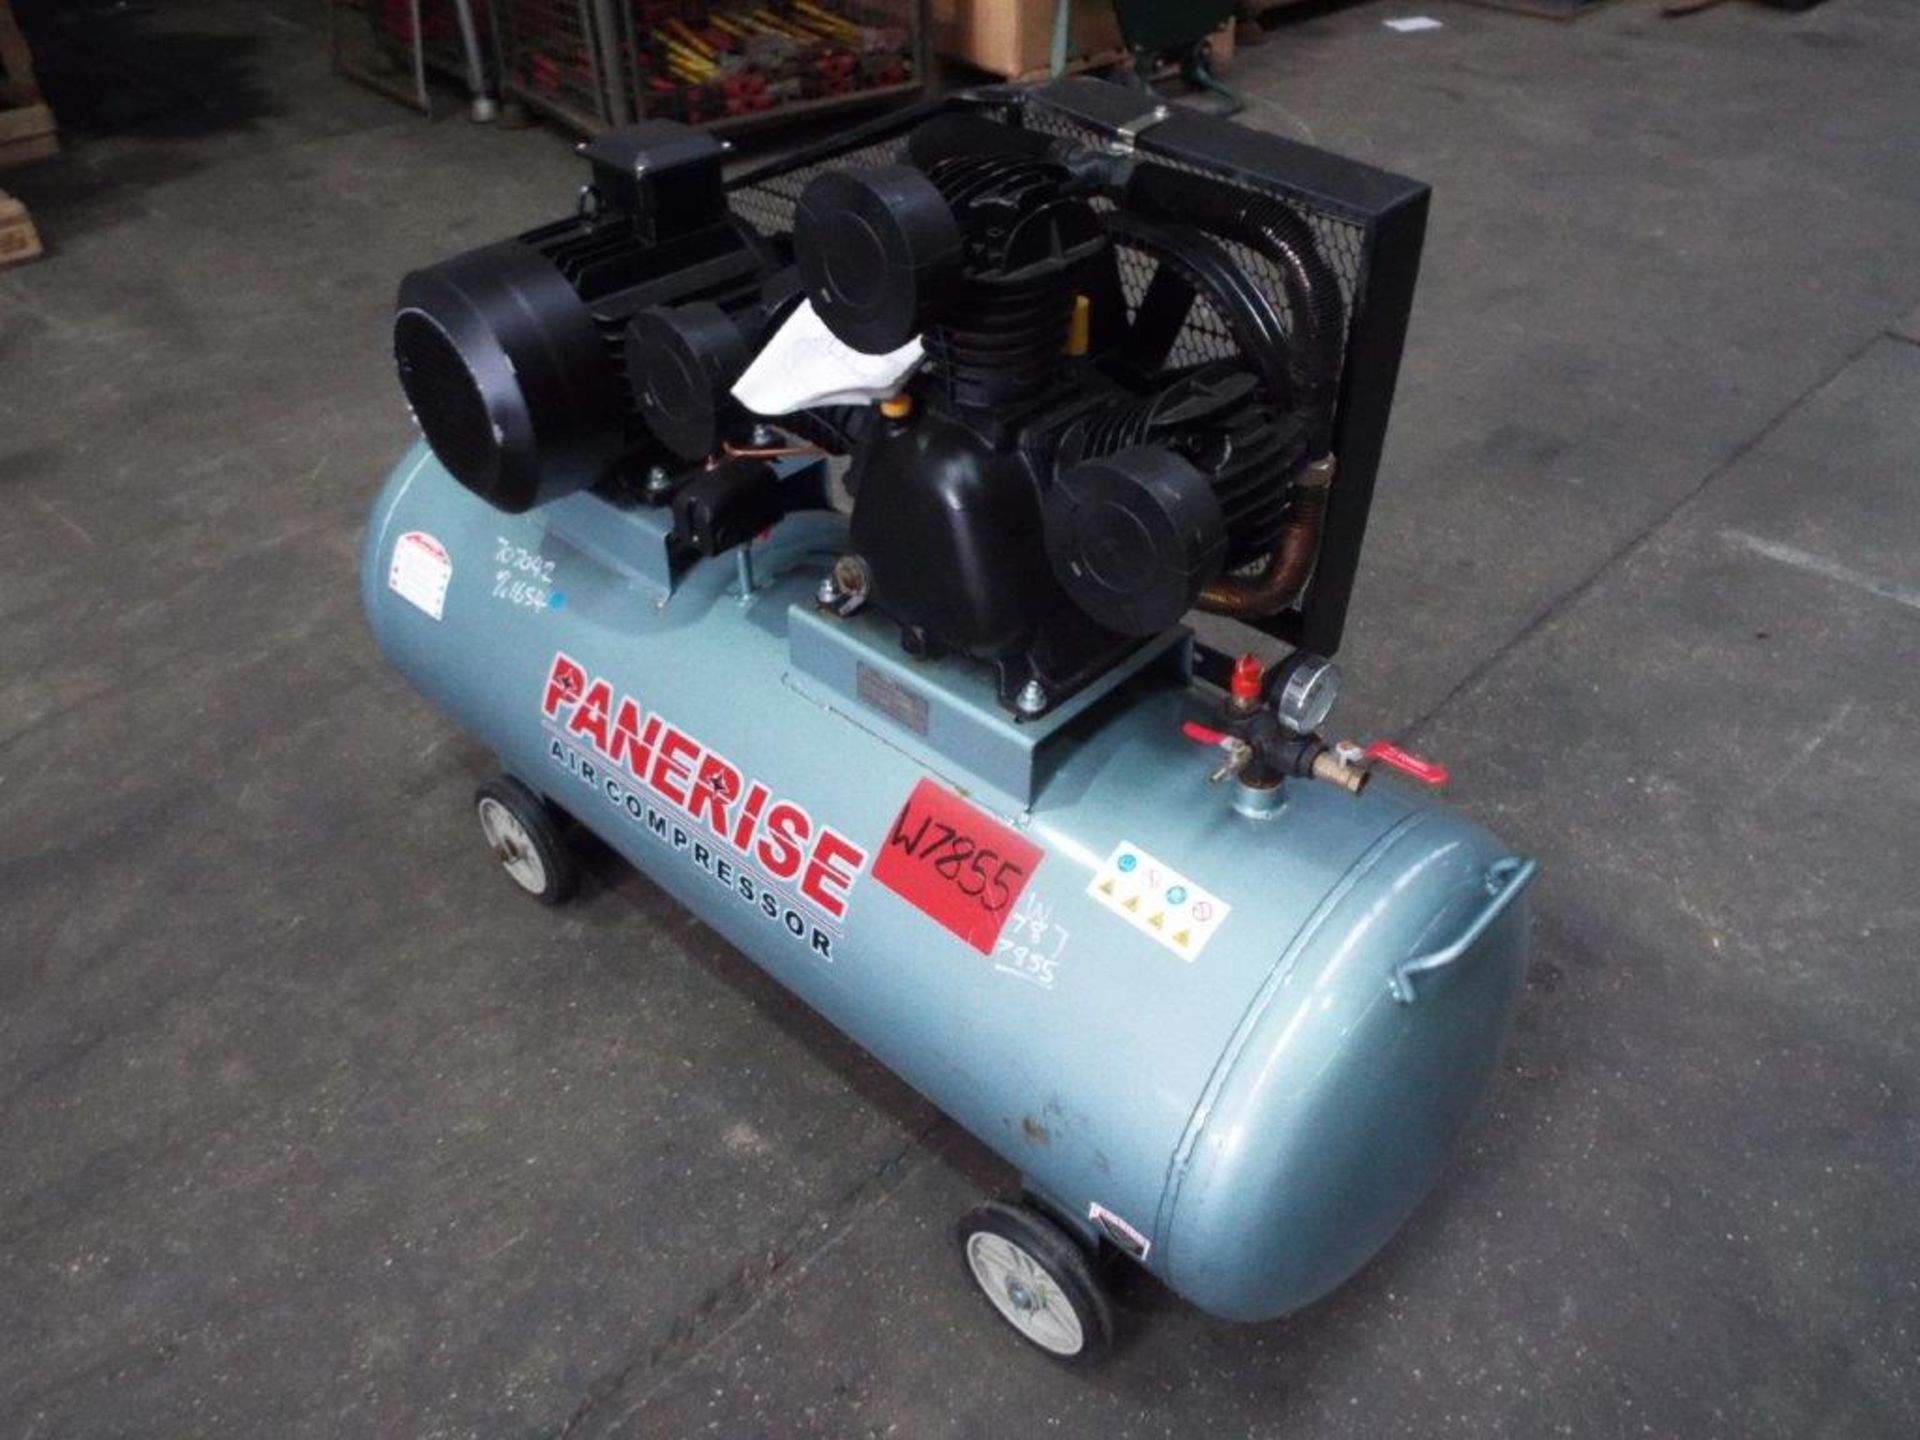 Unused Panerise PW3090A-300 10HP Air Compressor - Image 3 of 14